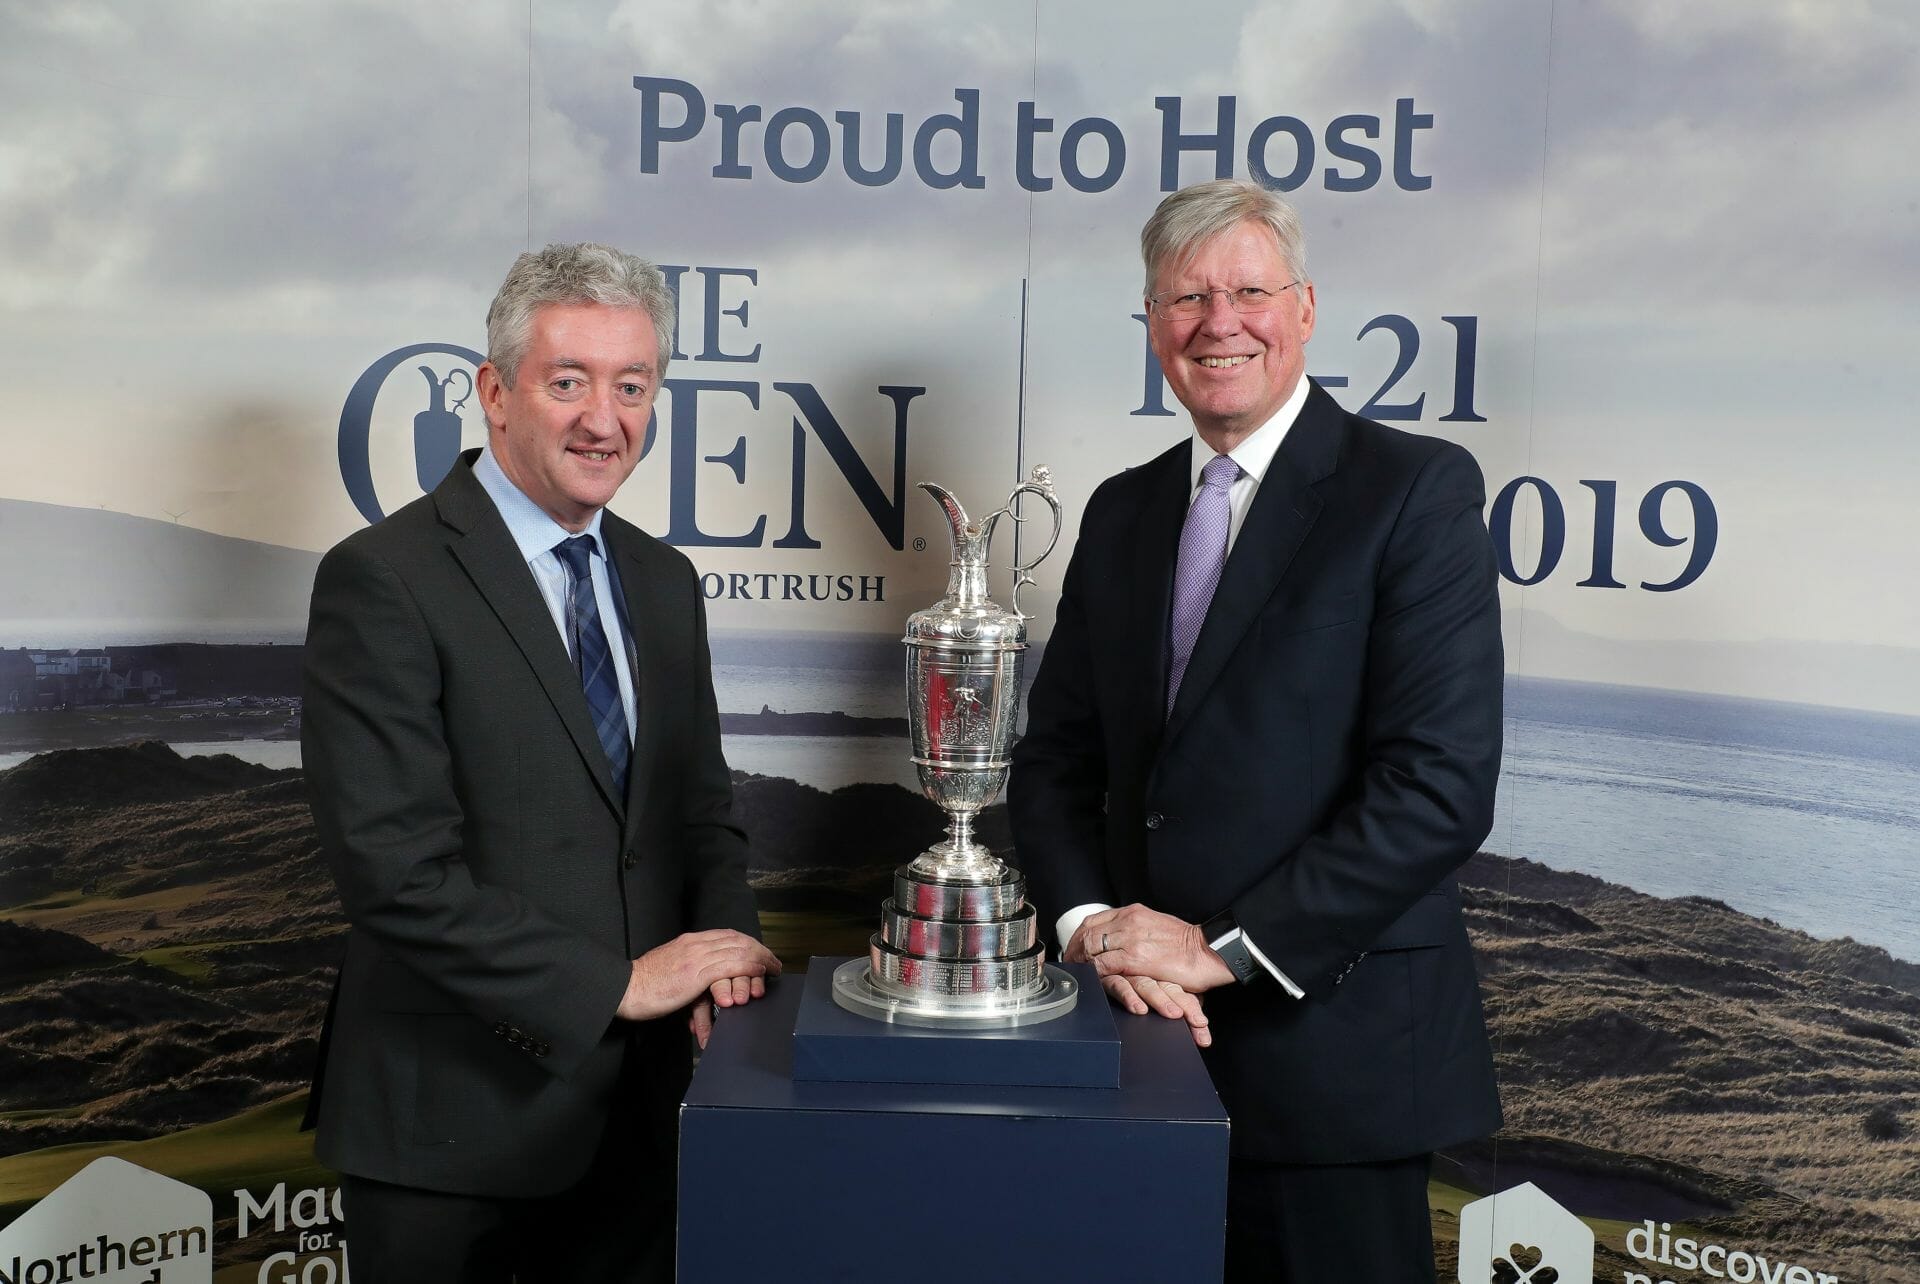 The 148th Open delivers over £100 million of economic benefit to Northern Ireland